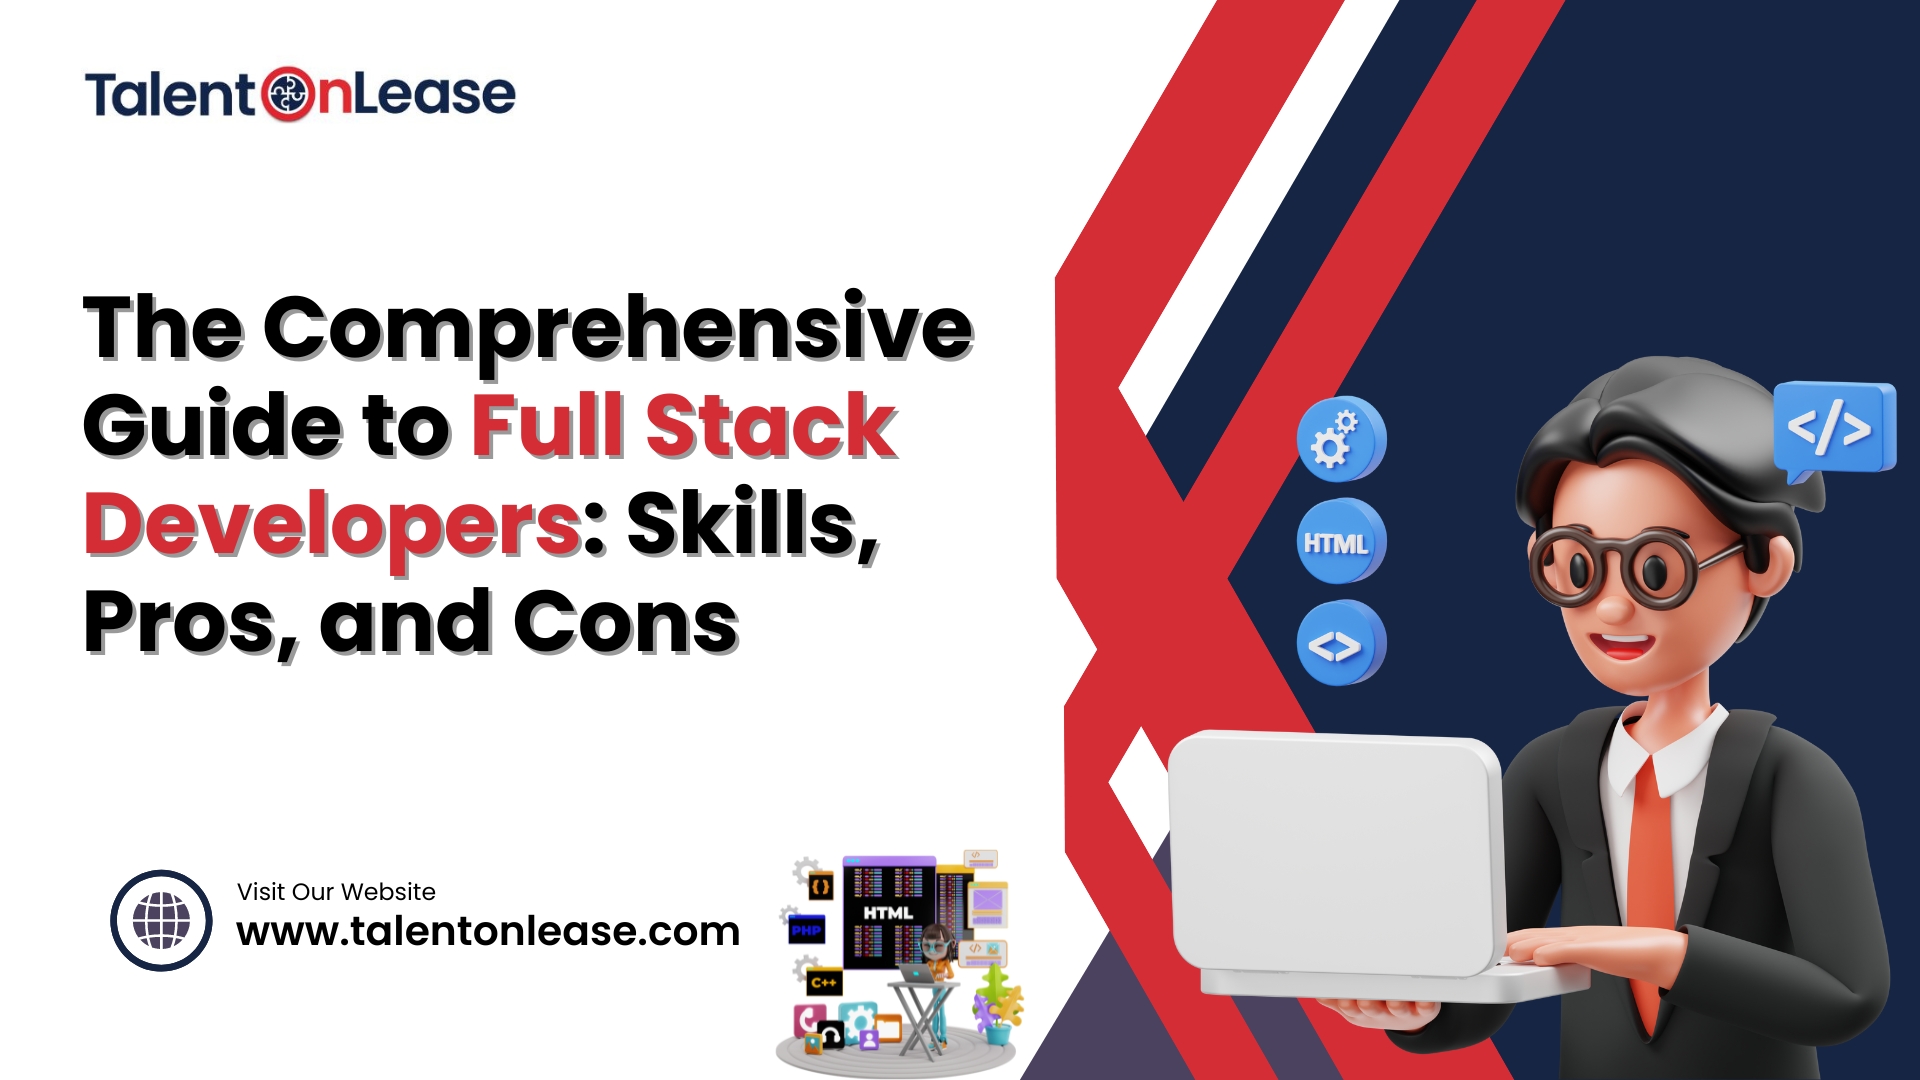 The Comprehensive Guide to Full Stack Developers: Skills, Pros, and Cons – IT Recruitment Platform